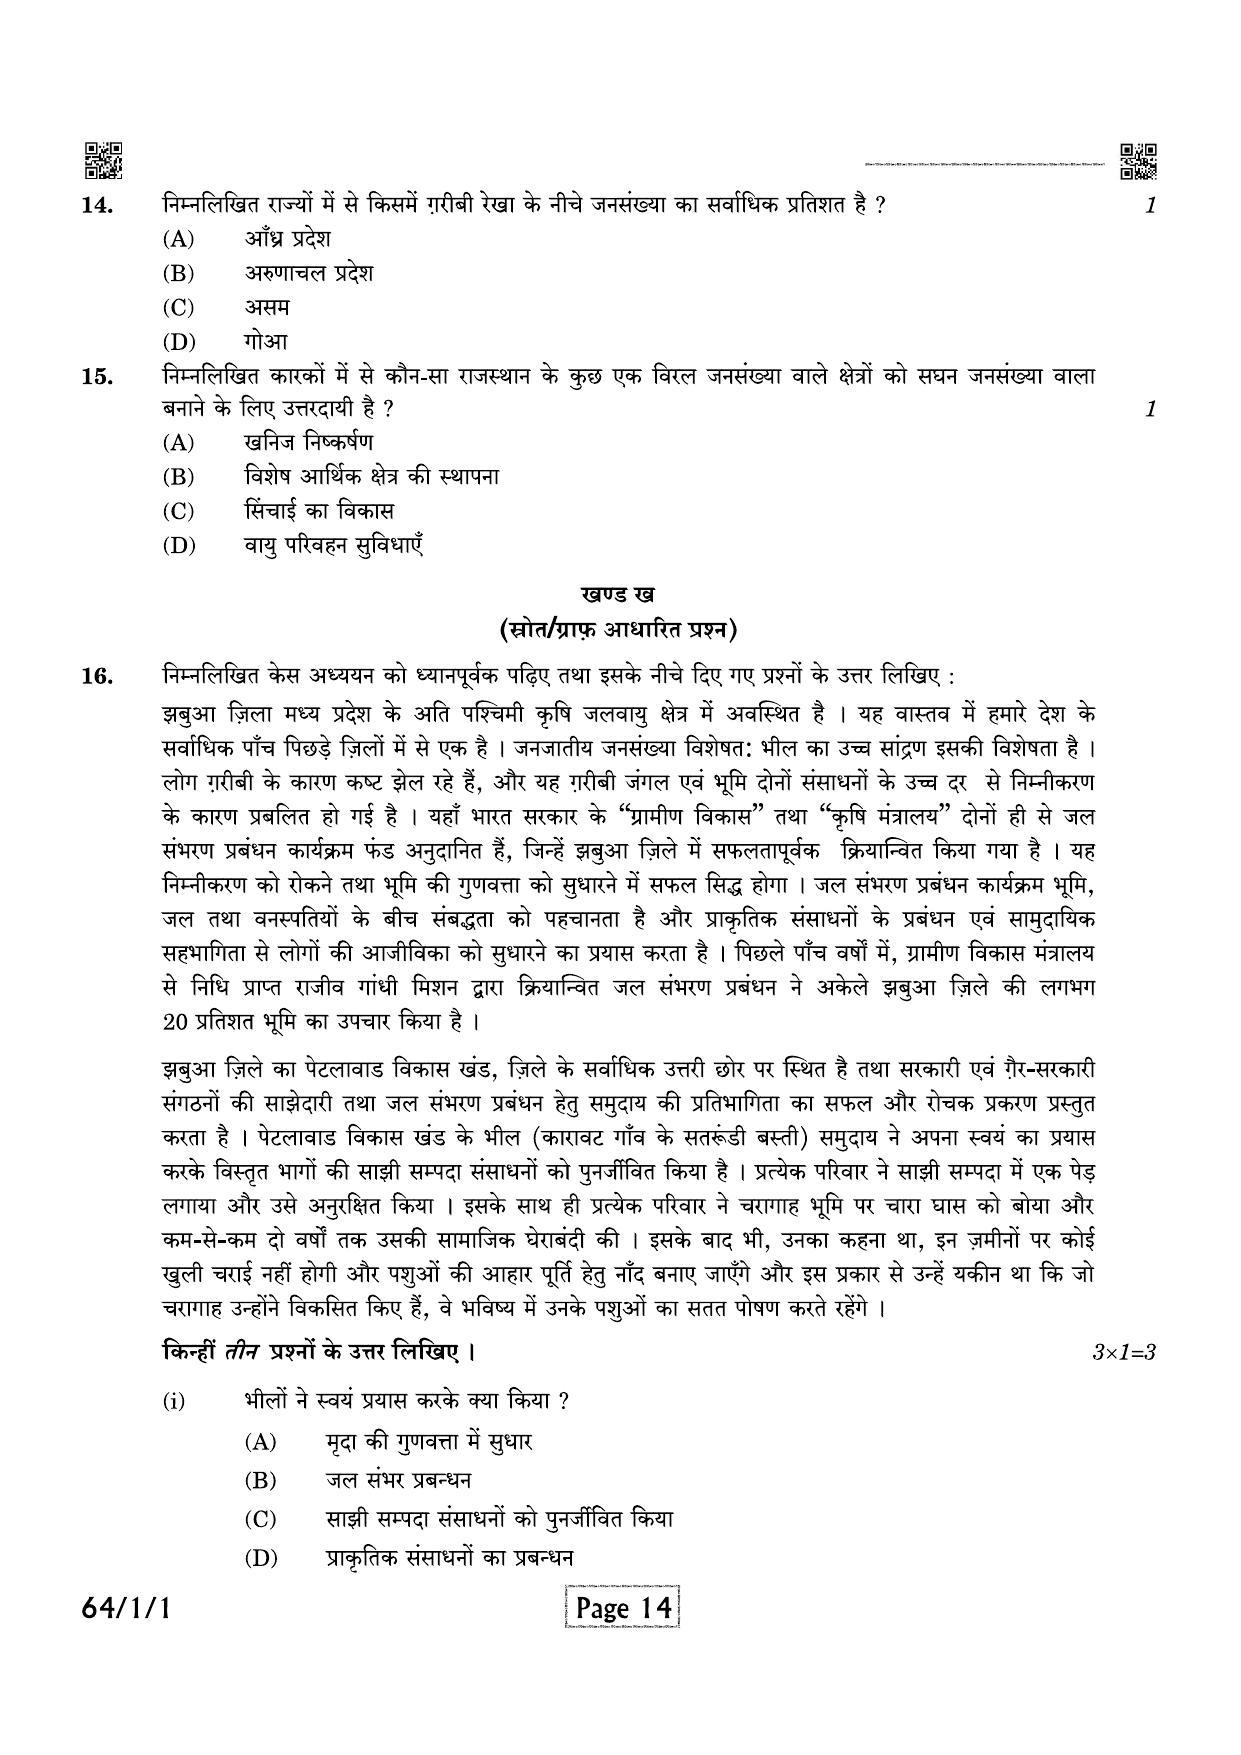 CBSE Class 12 QP_029_Geography 2021 Compartment Question Paper - Page 14